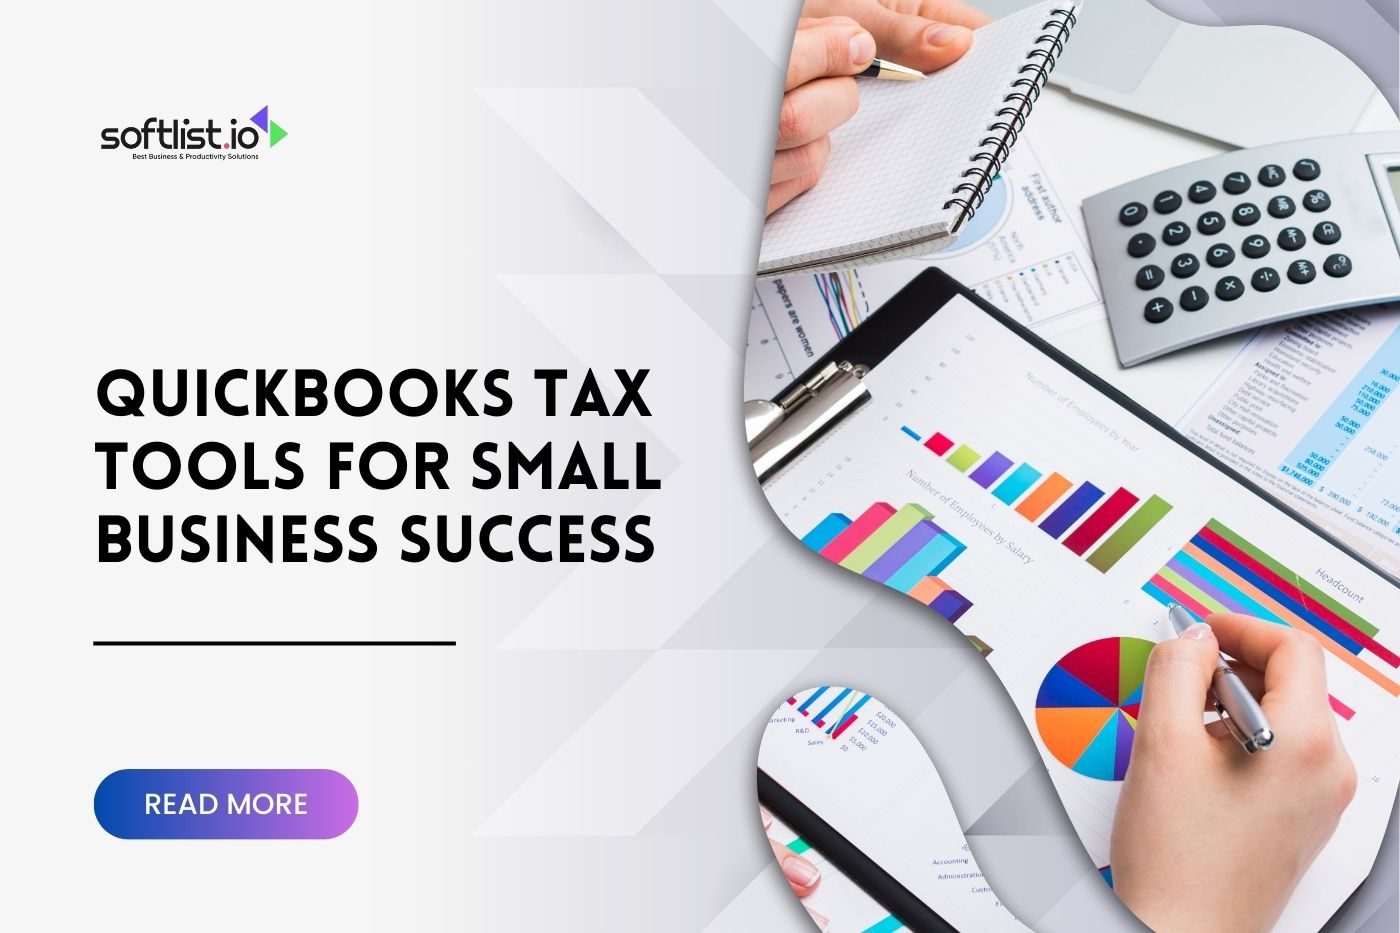 Three QuickBooks Tools to Help Small Businesses Succeed During Tax Season